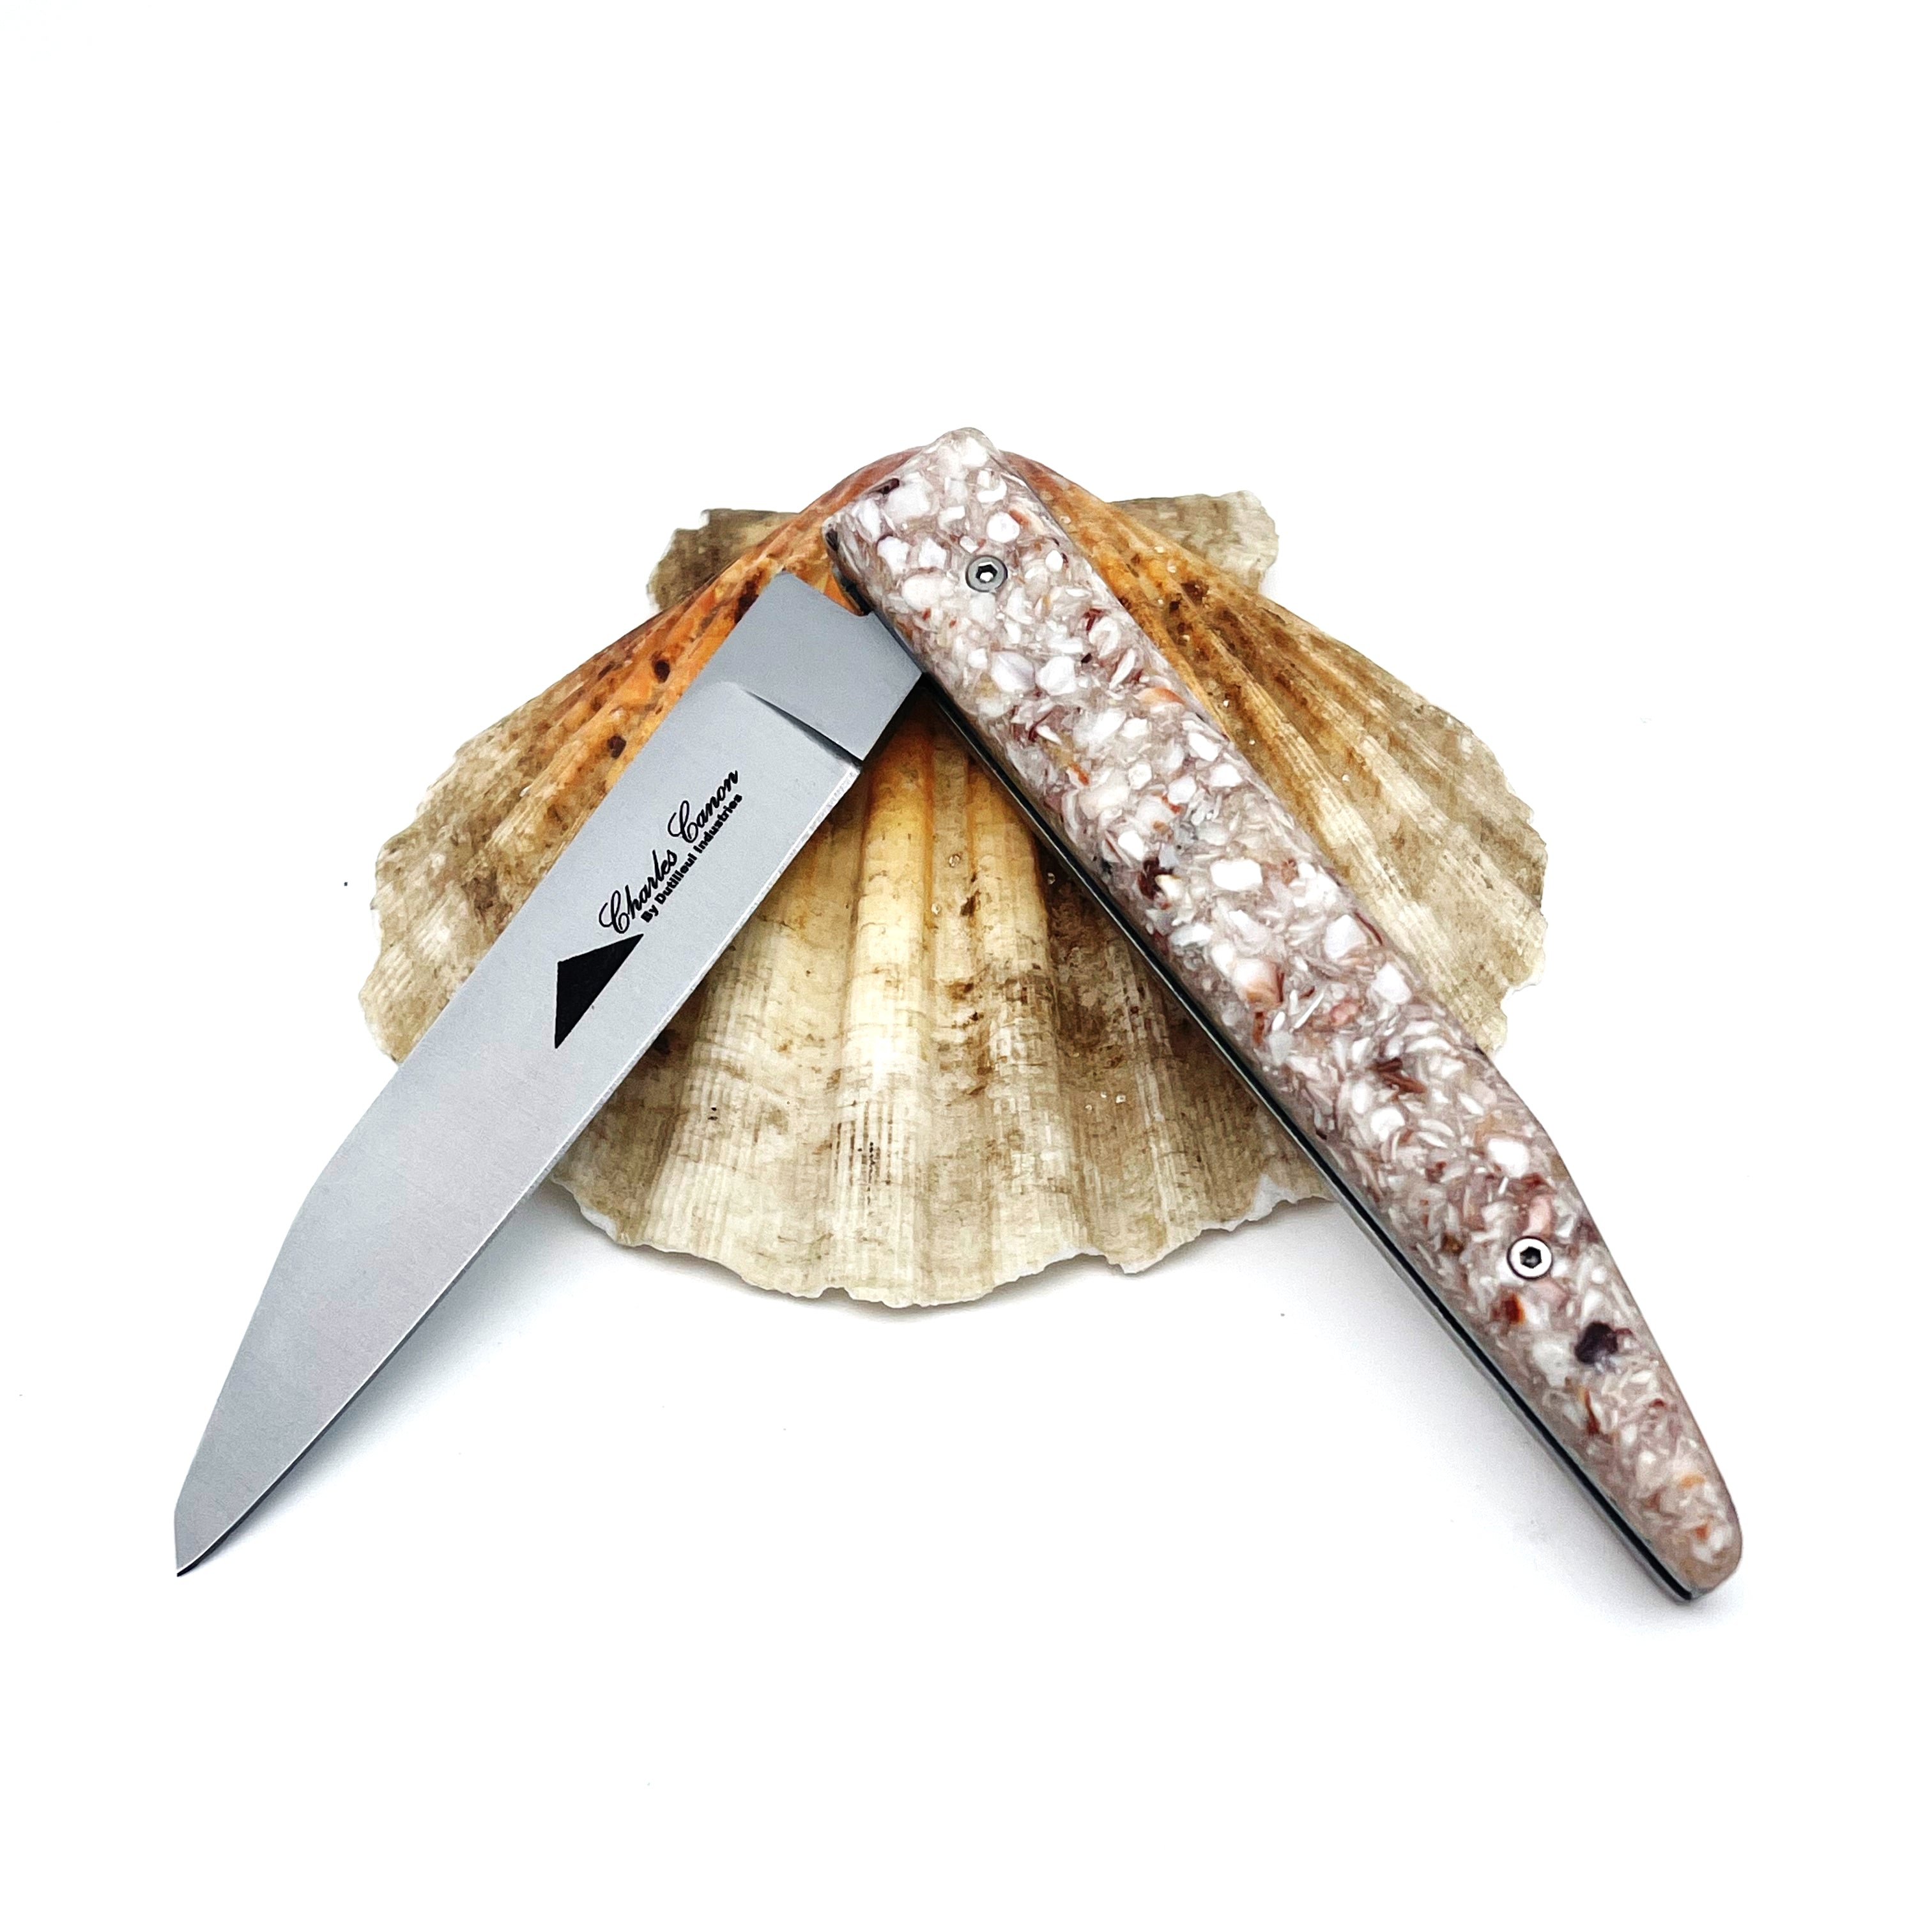 Knife with scallop shell handle